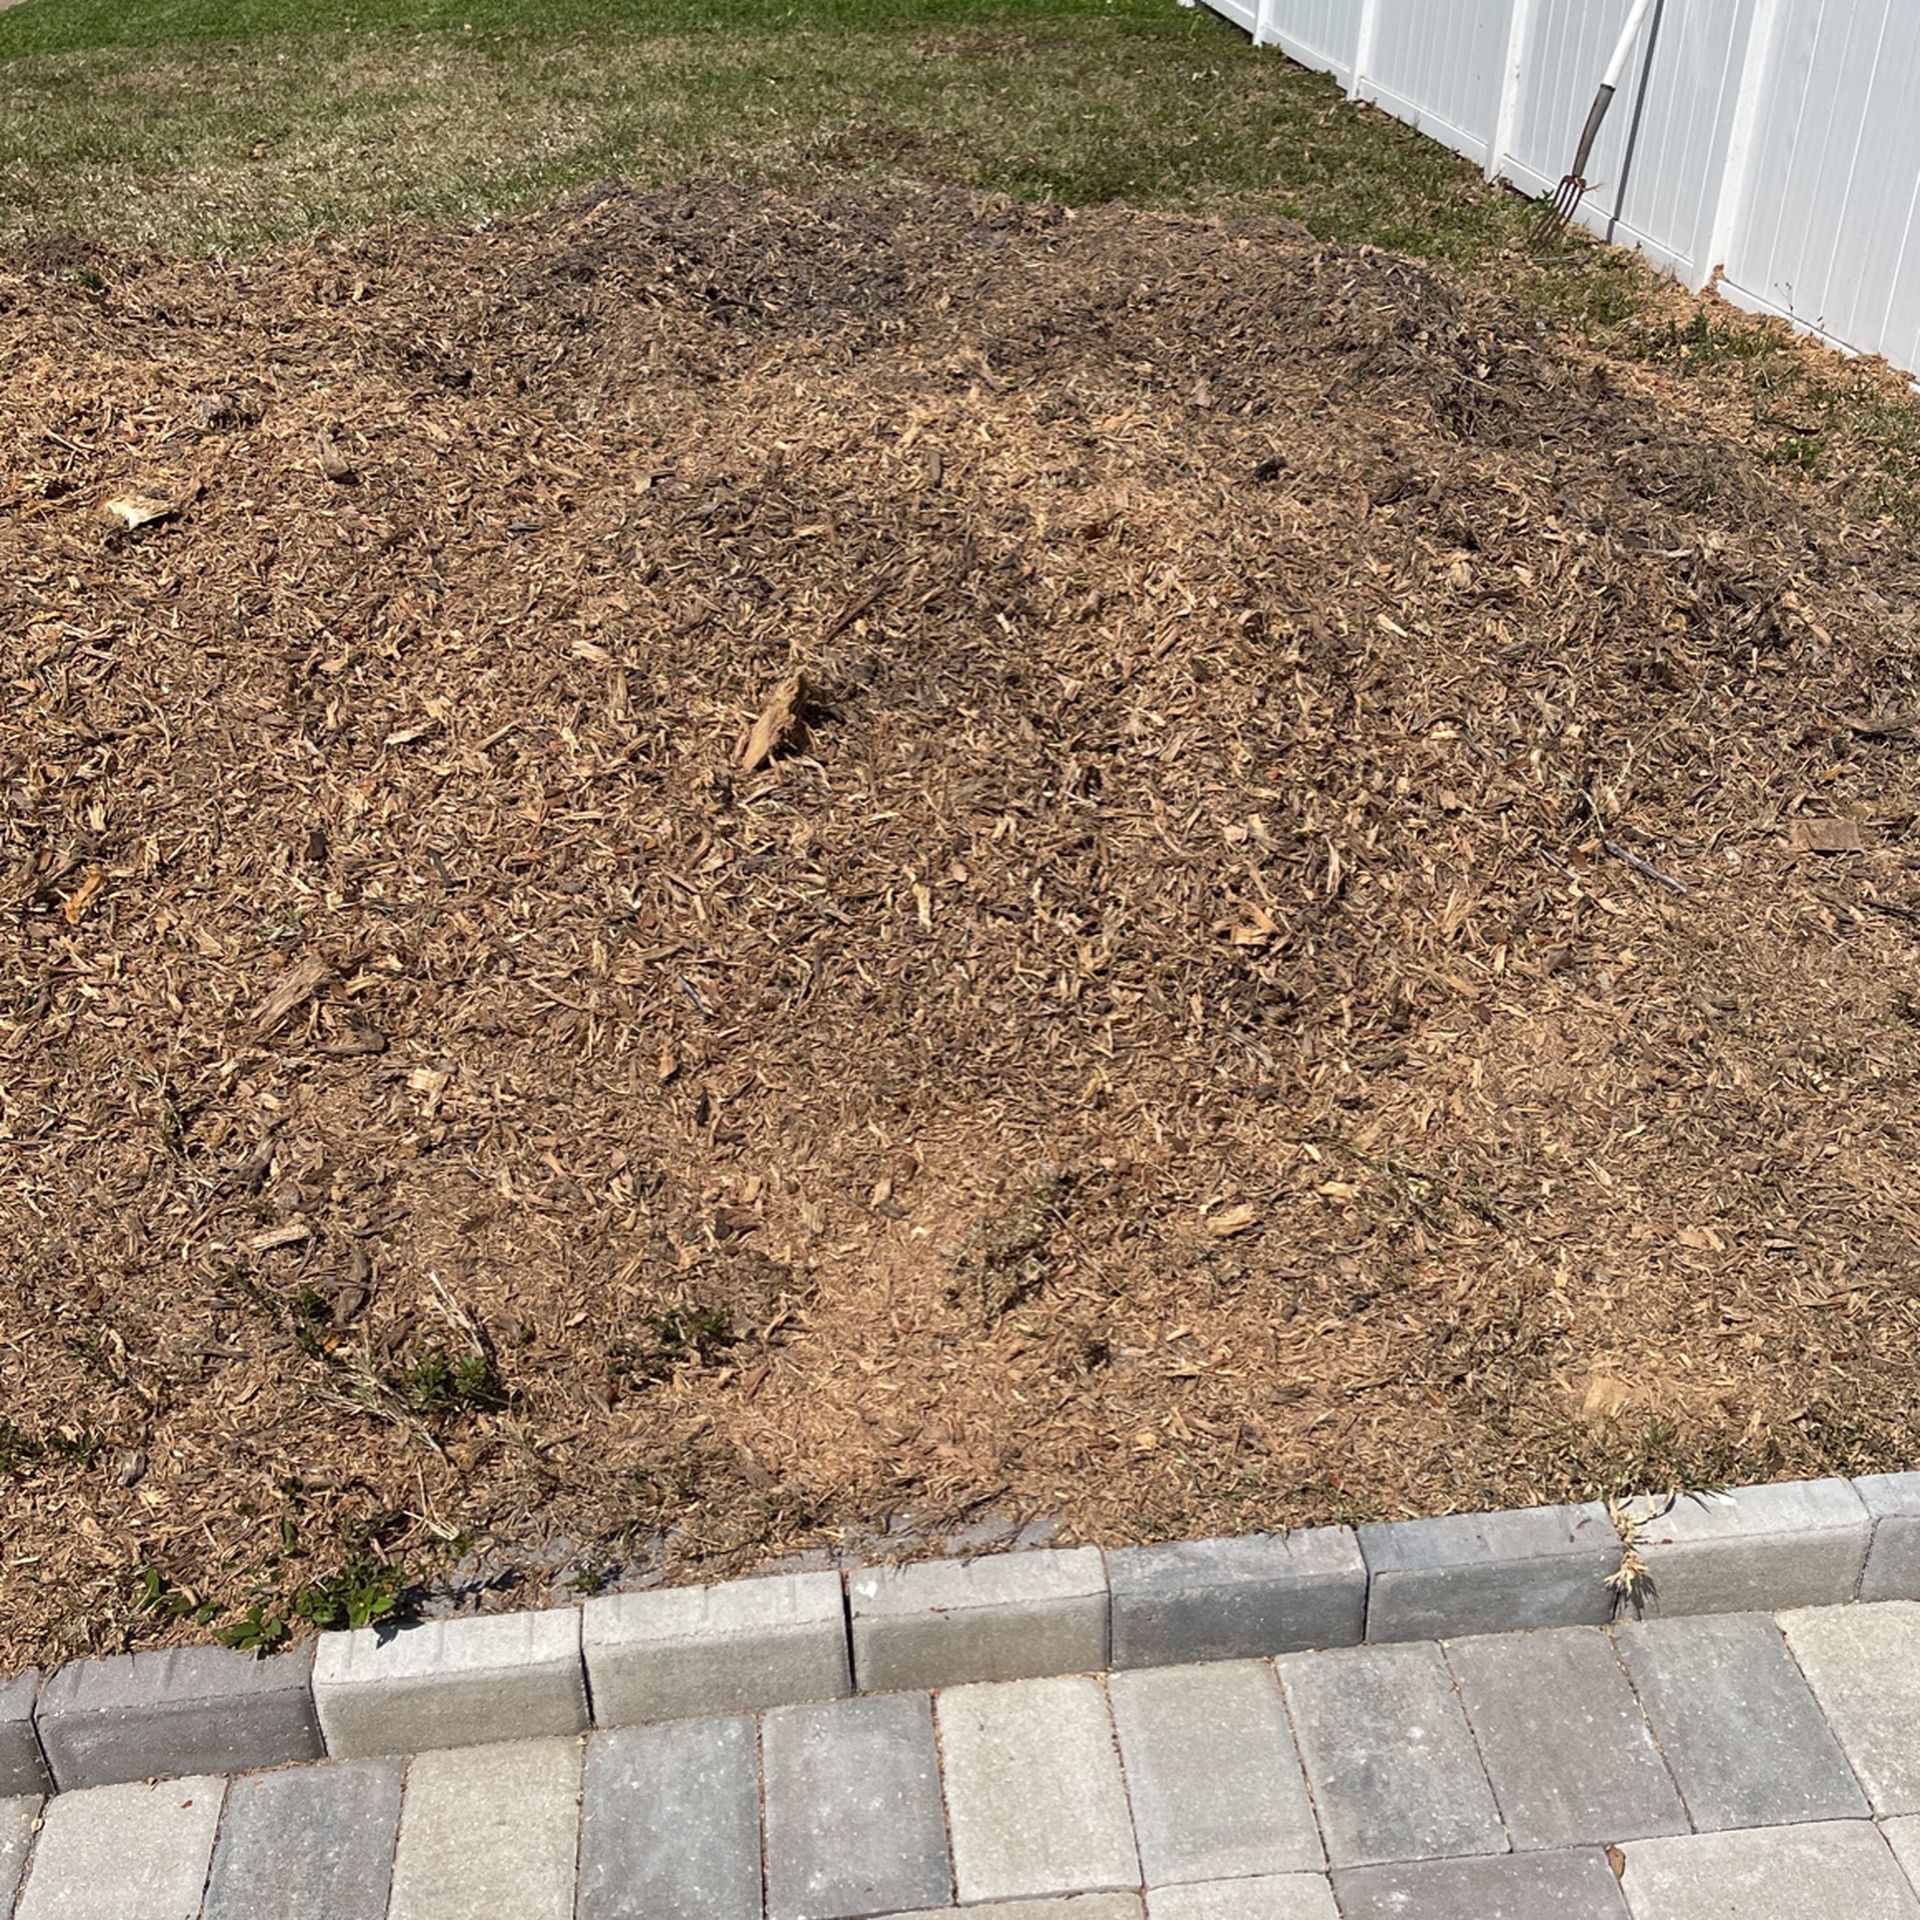 Free Mulch From Stump Grinding 